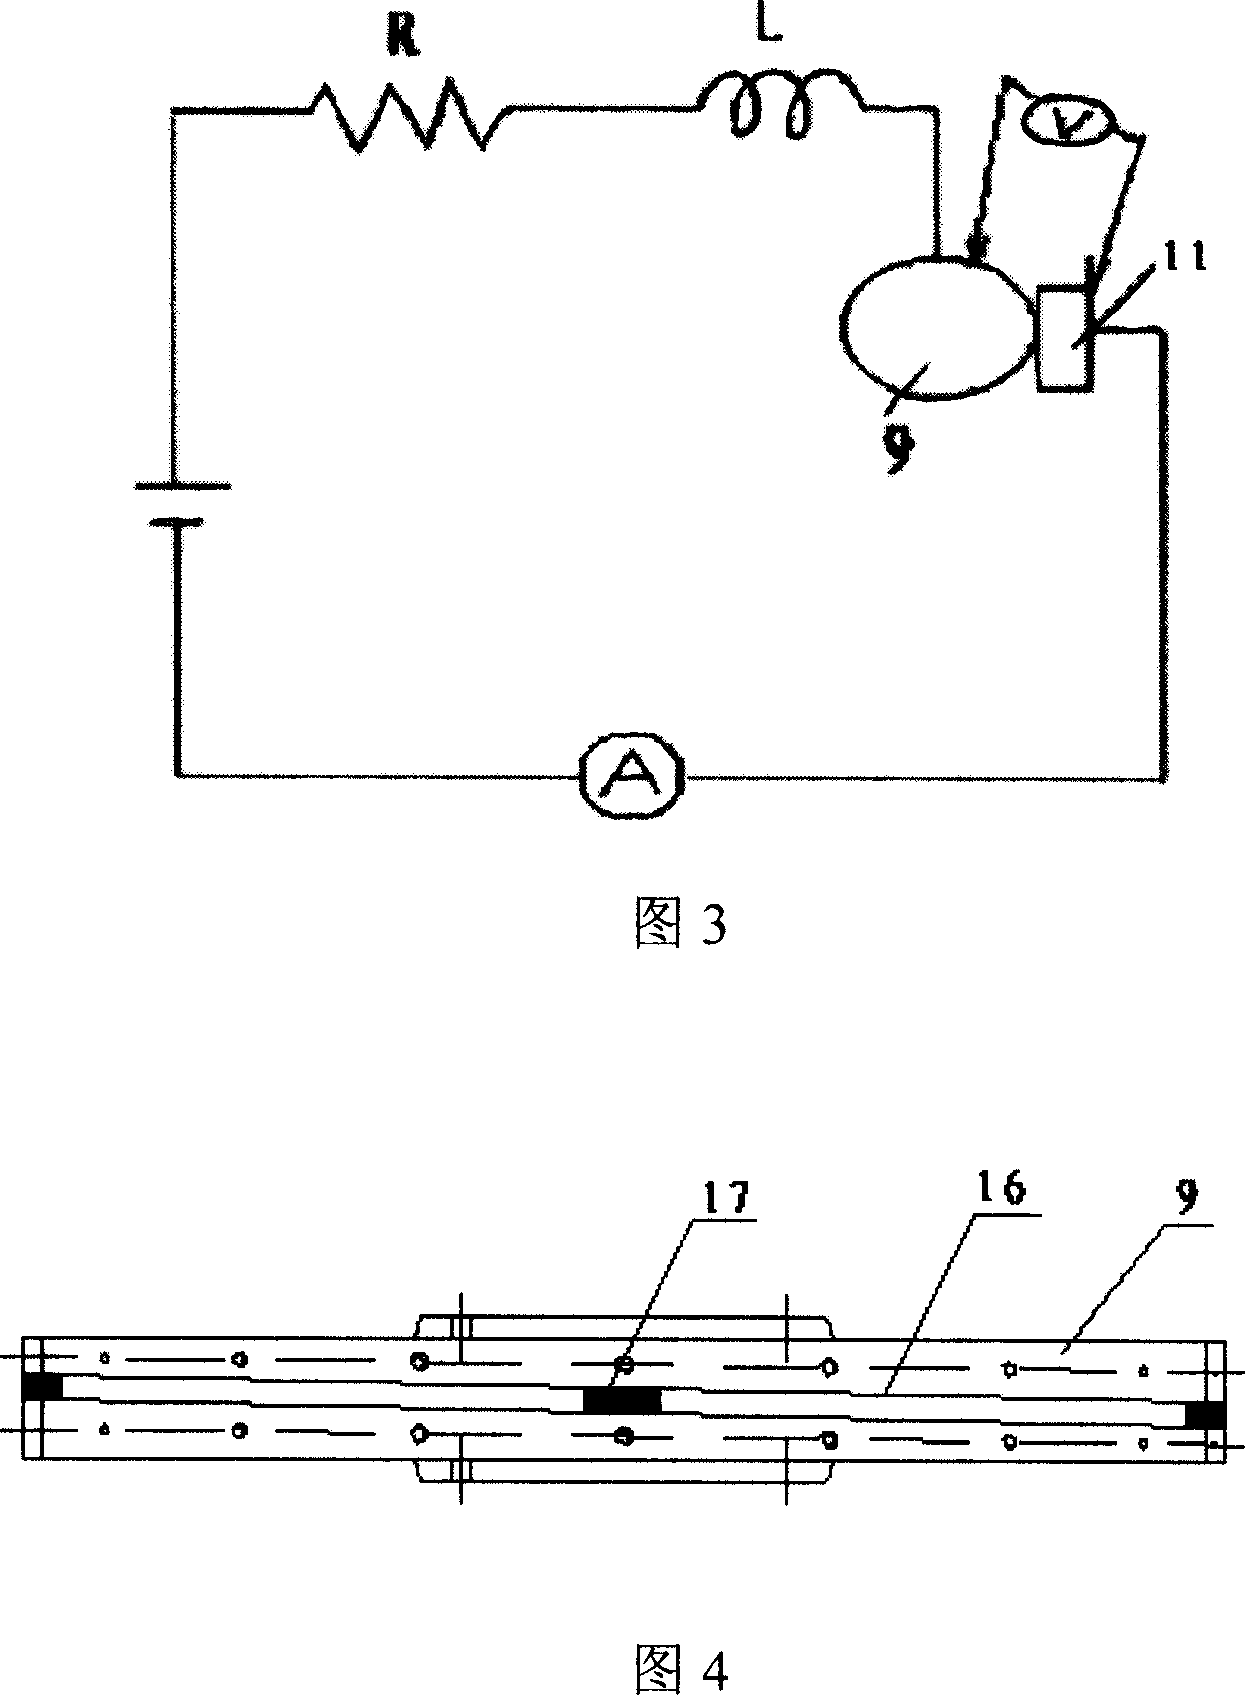 Device for measuring high-speed electrical sliding wear